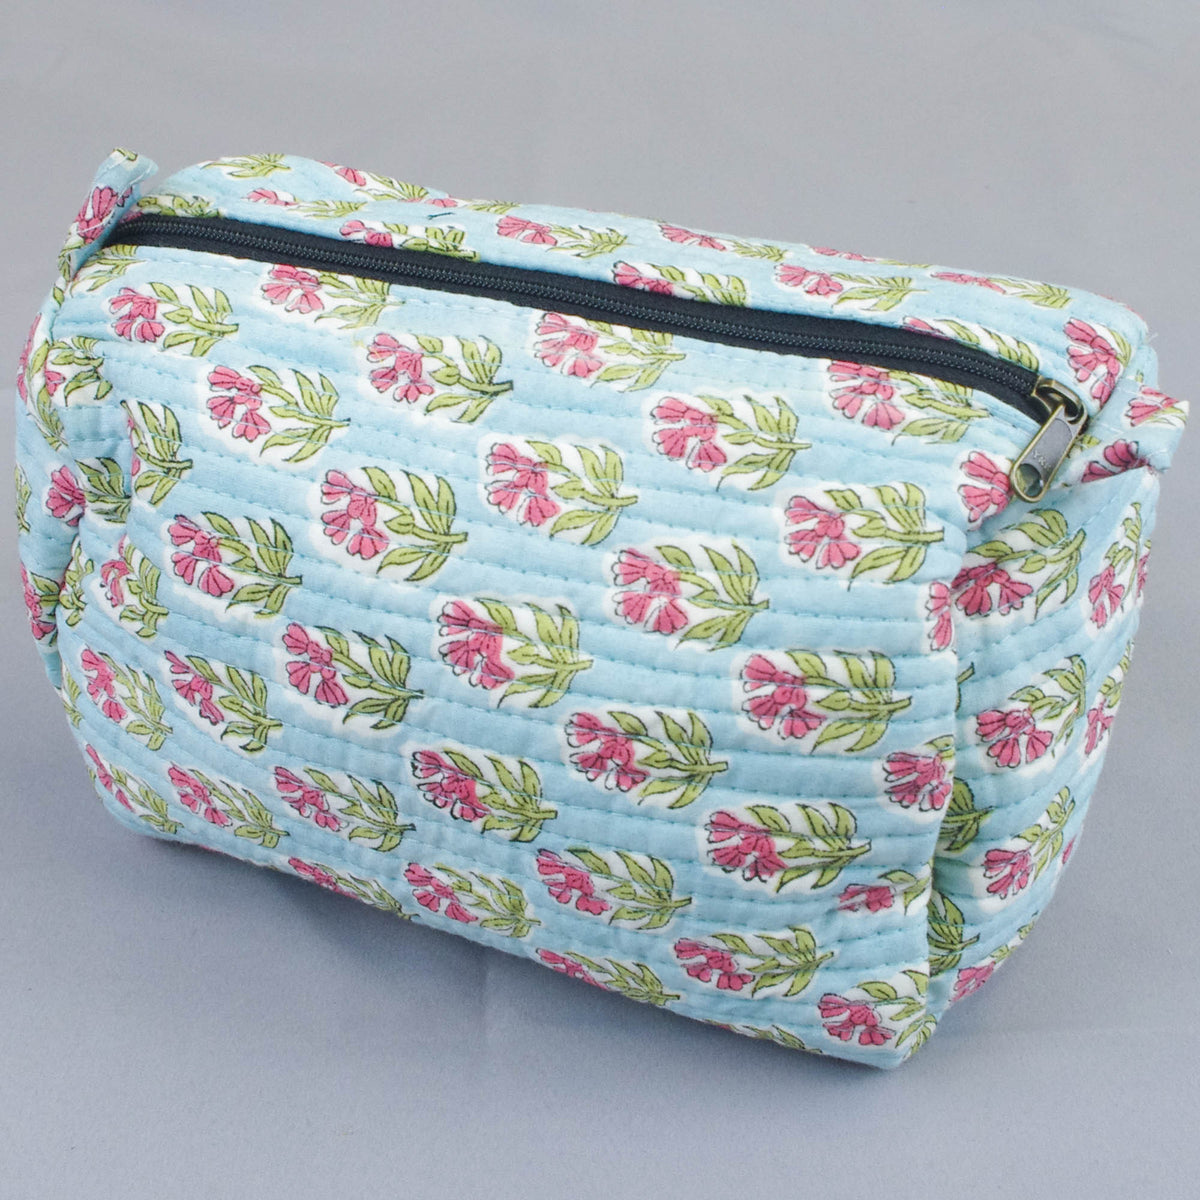 Block Print Quilted Toiletry Bag - Pink Floral On Aqua Blue